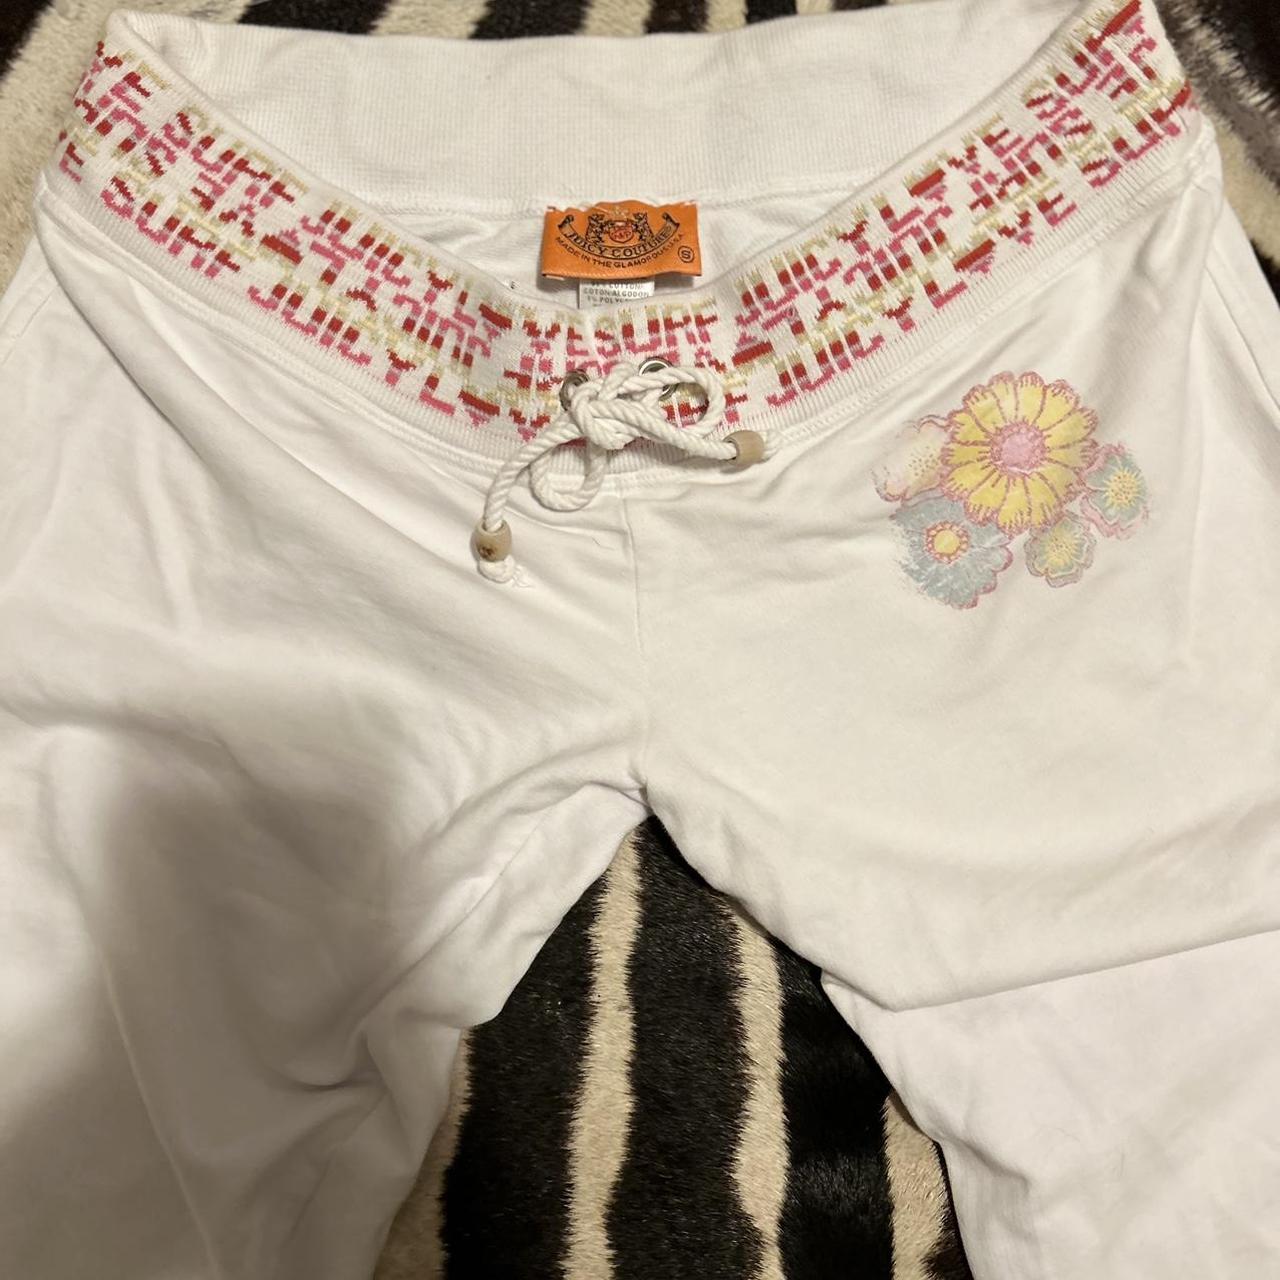 ADORBS juicy surf white pants with flower detail and... - Depop